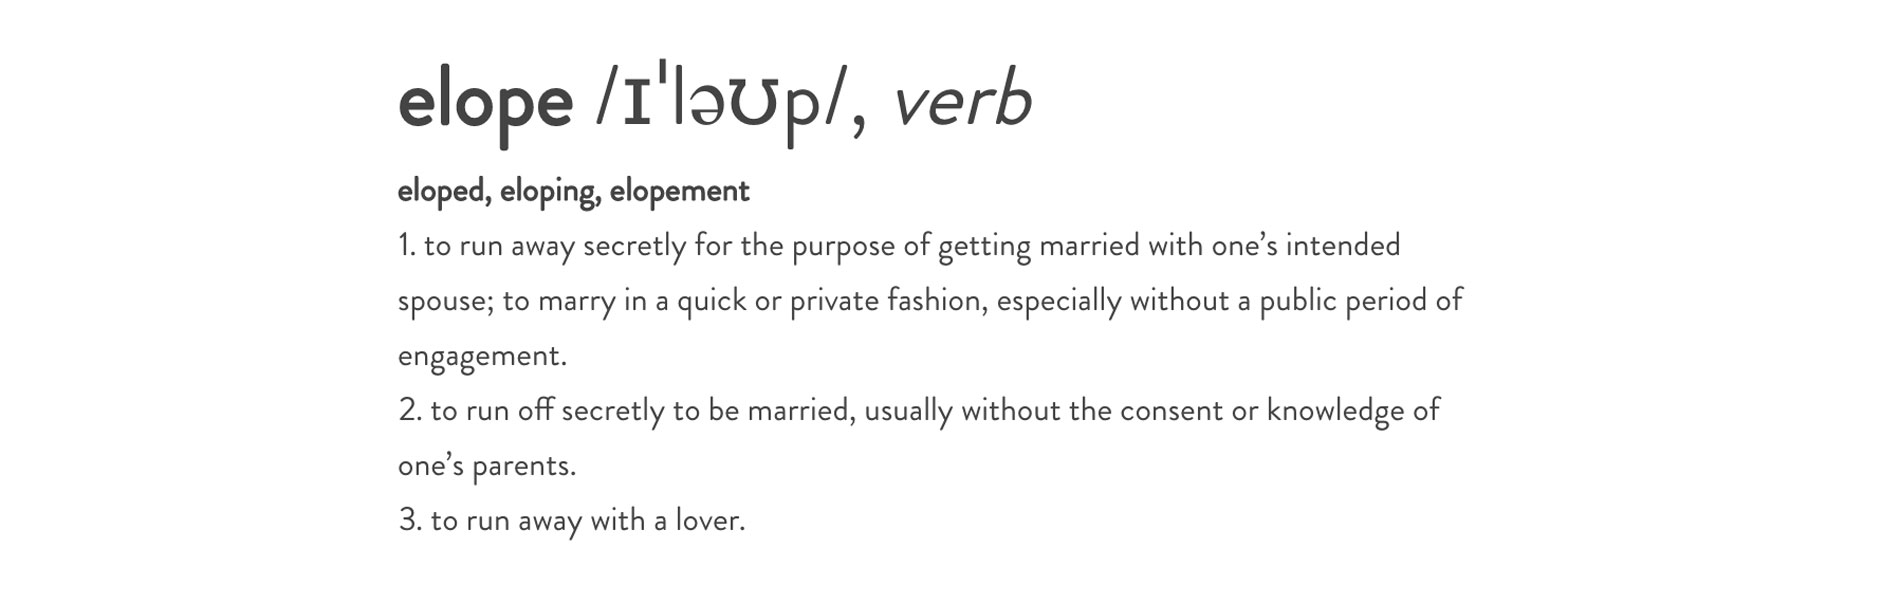 The definition of "elope"